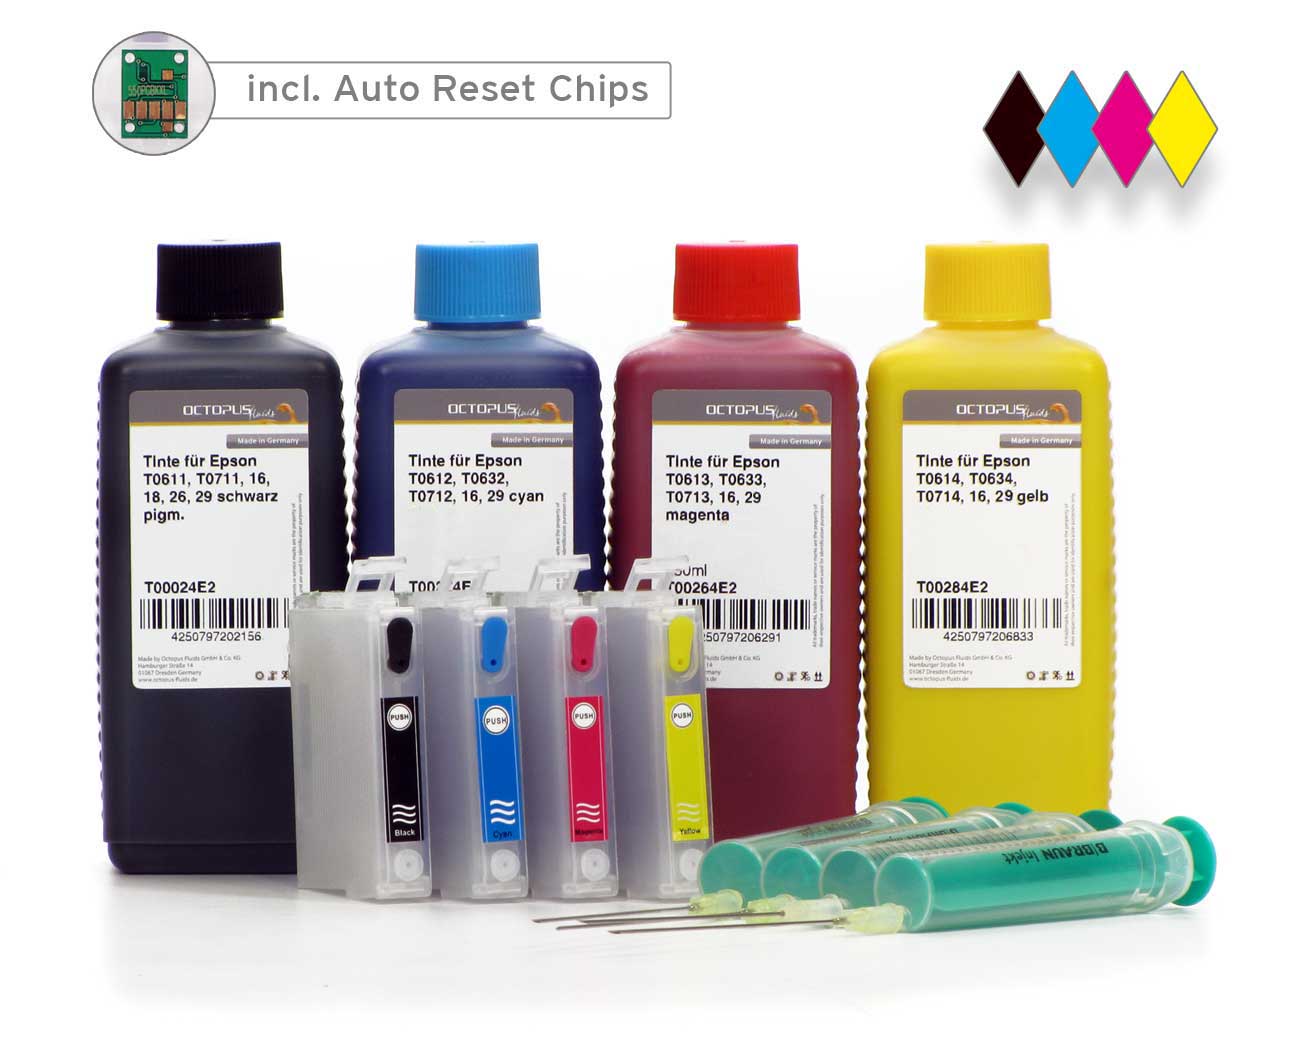 Refillable cartridges for Epson 29 with auto reset chips and 4x of ink